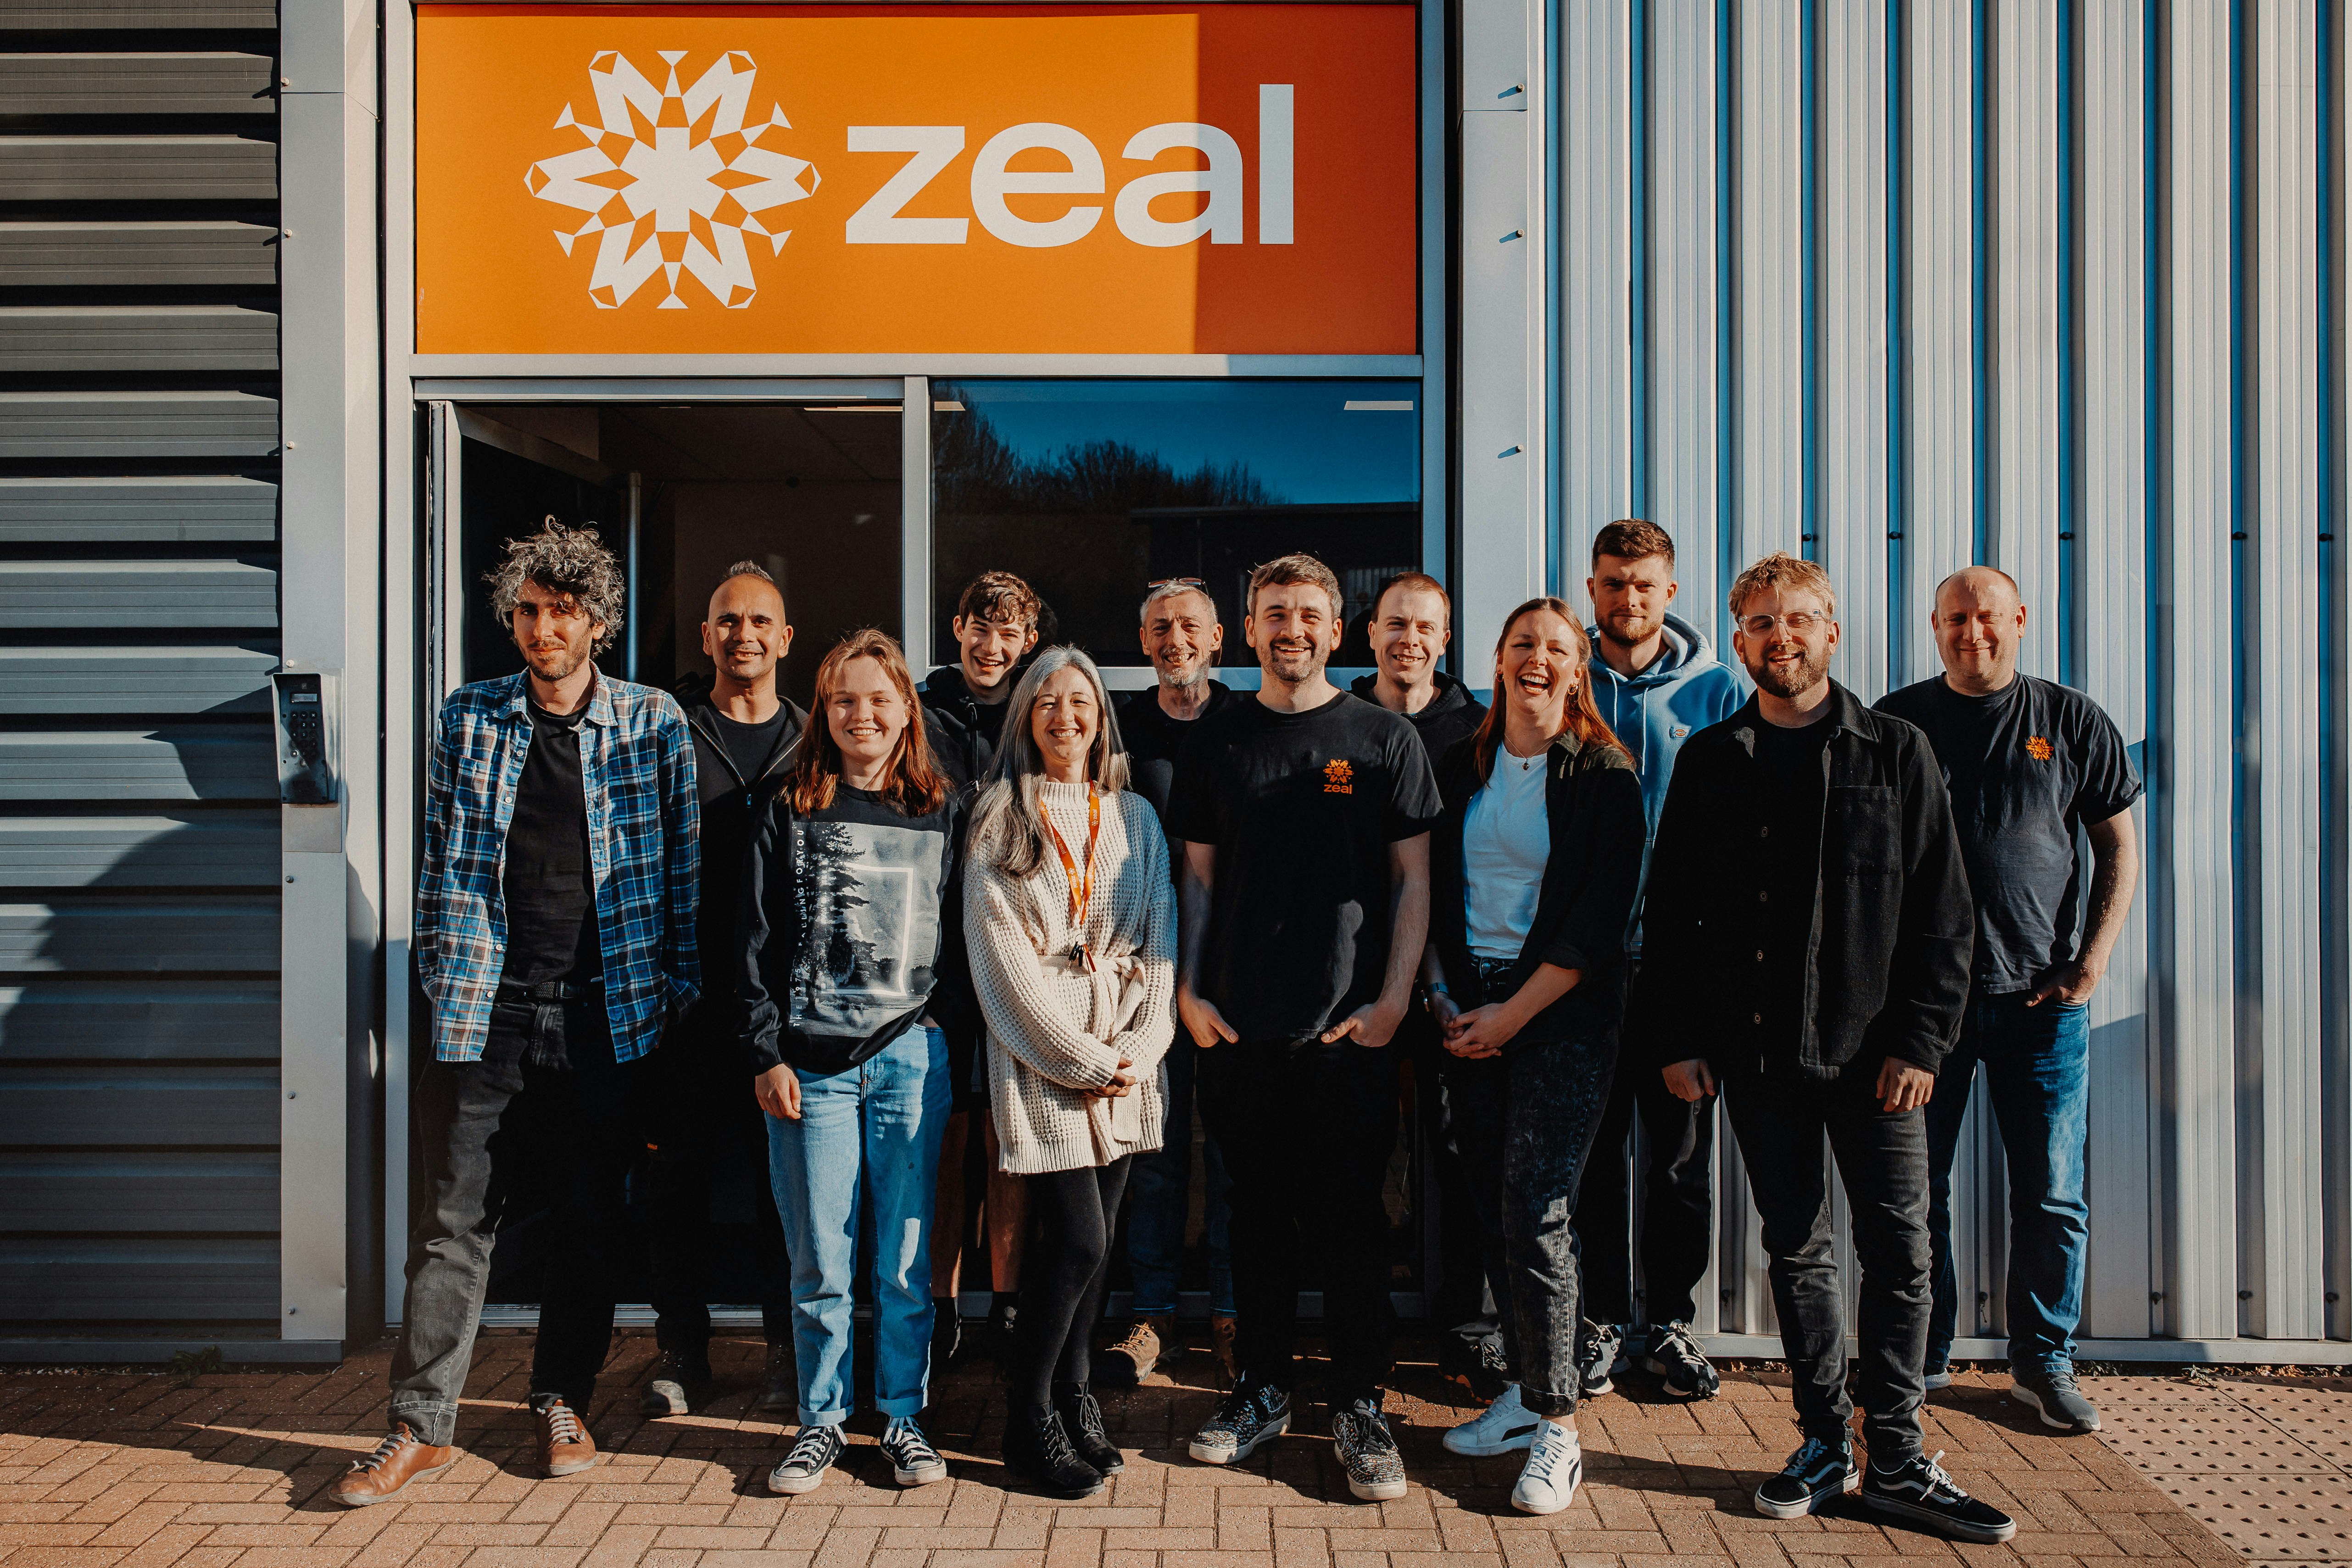 A team of 12 people stand outside the front of their office. They all smile at the camera. Behind them is a large class door, steel panels and a large orange sign with the text Zeal.